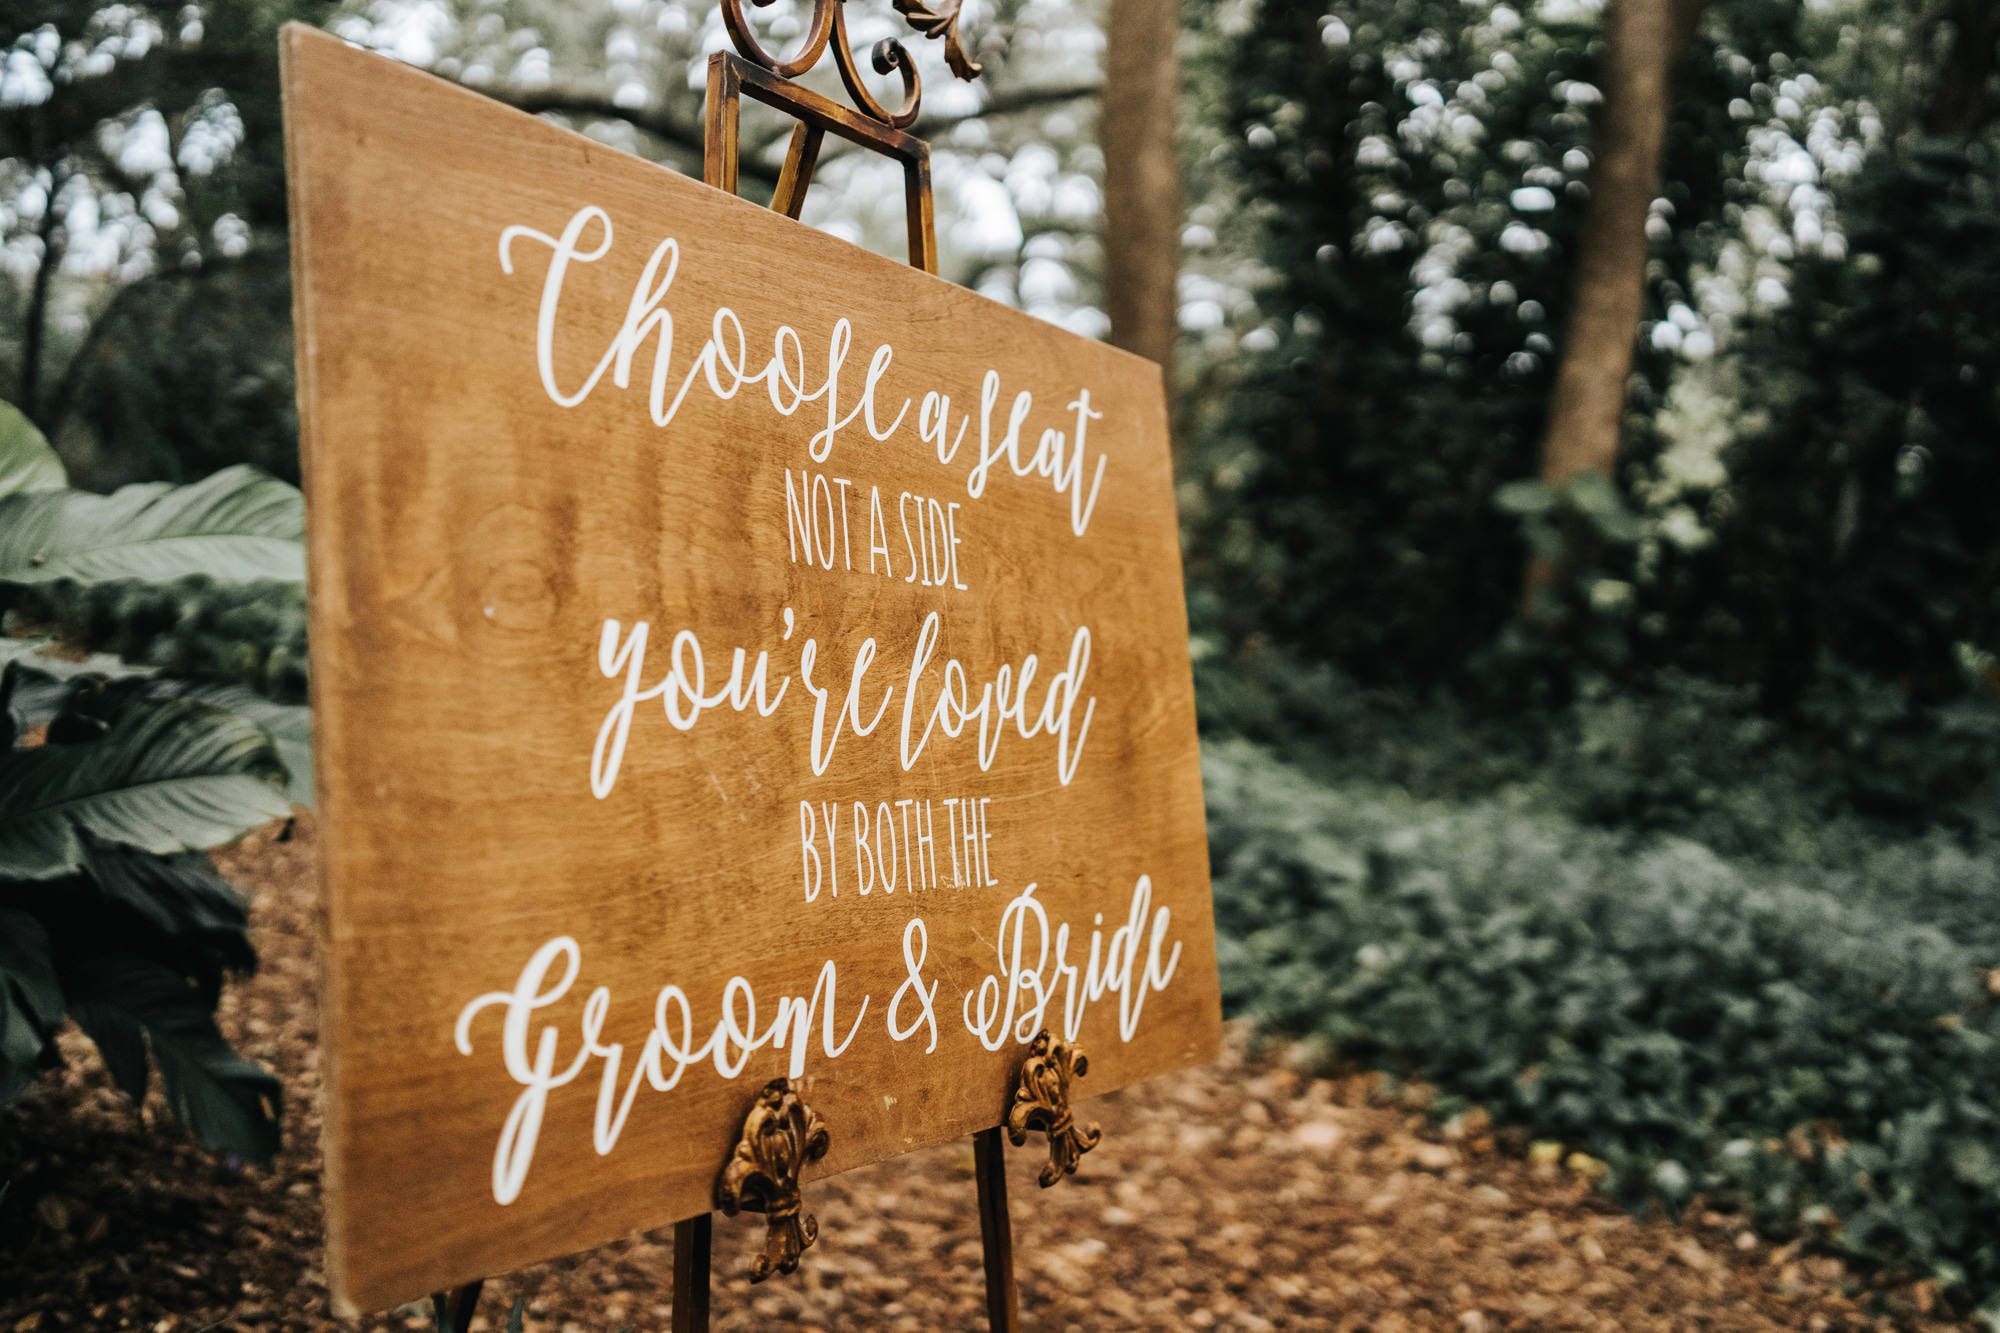 Rustic Wood Wedding Welcome Sign | Choose a Seat Not a Side You're Loved by Both the Groom and Bride